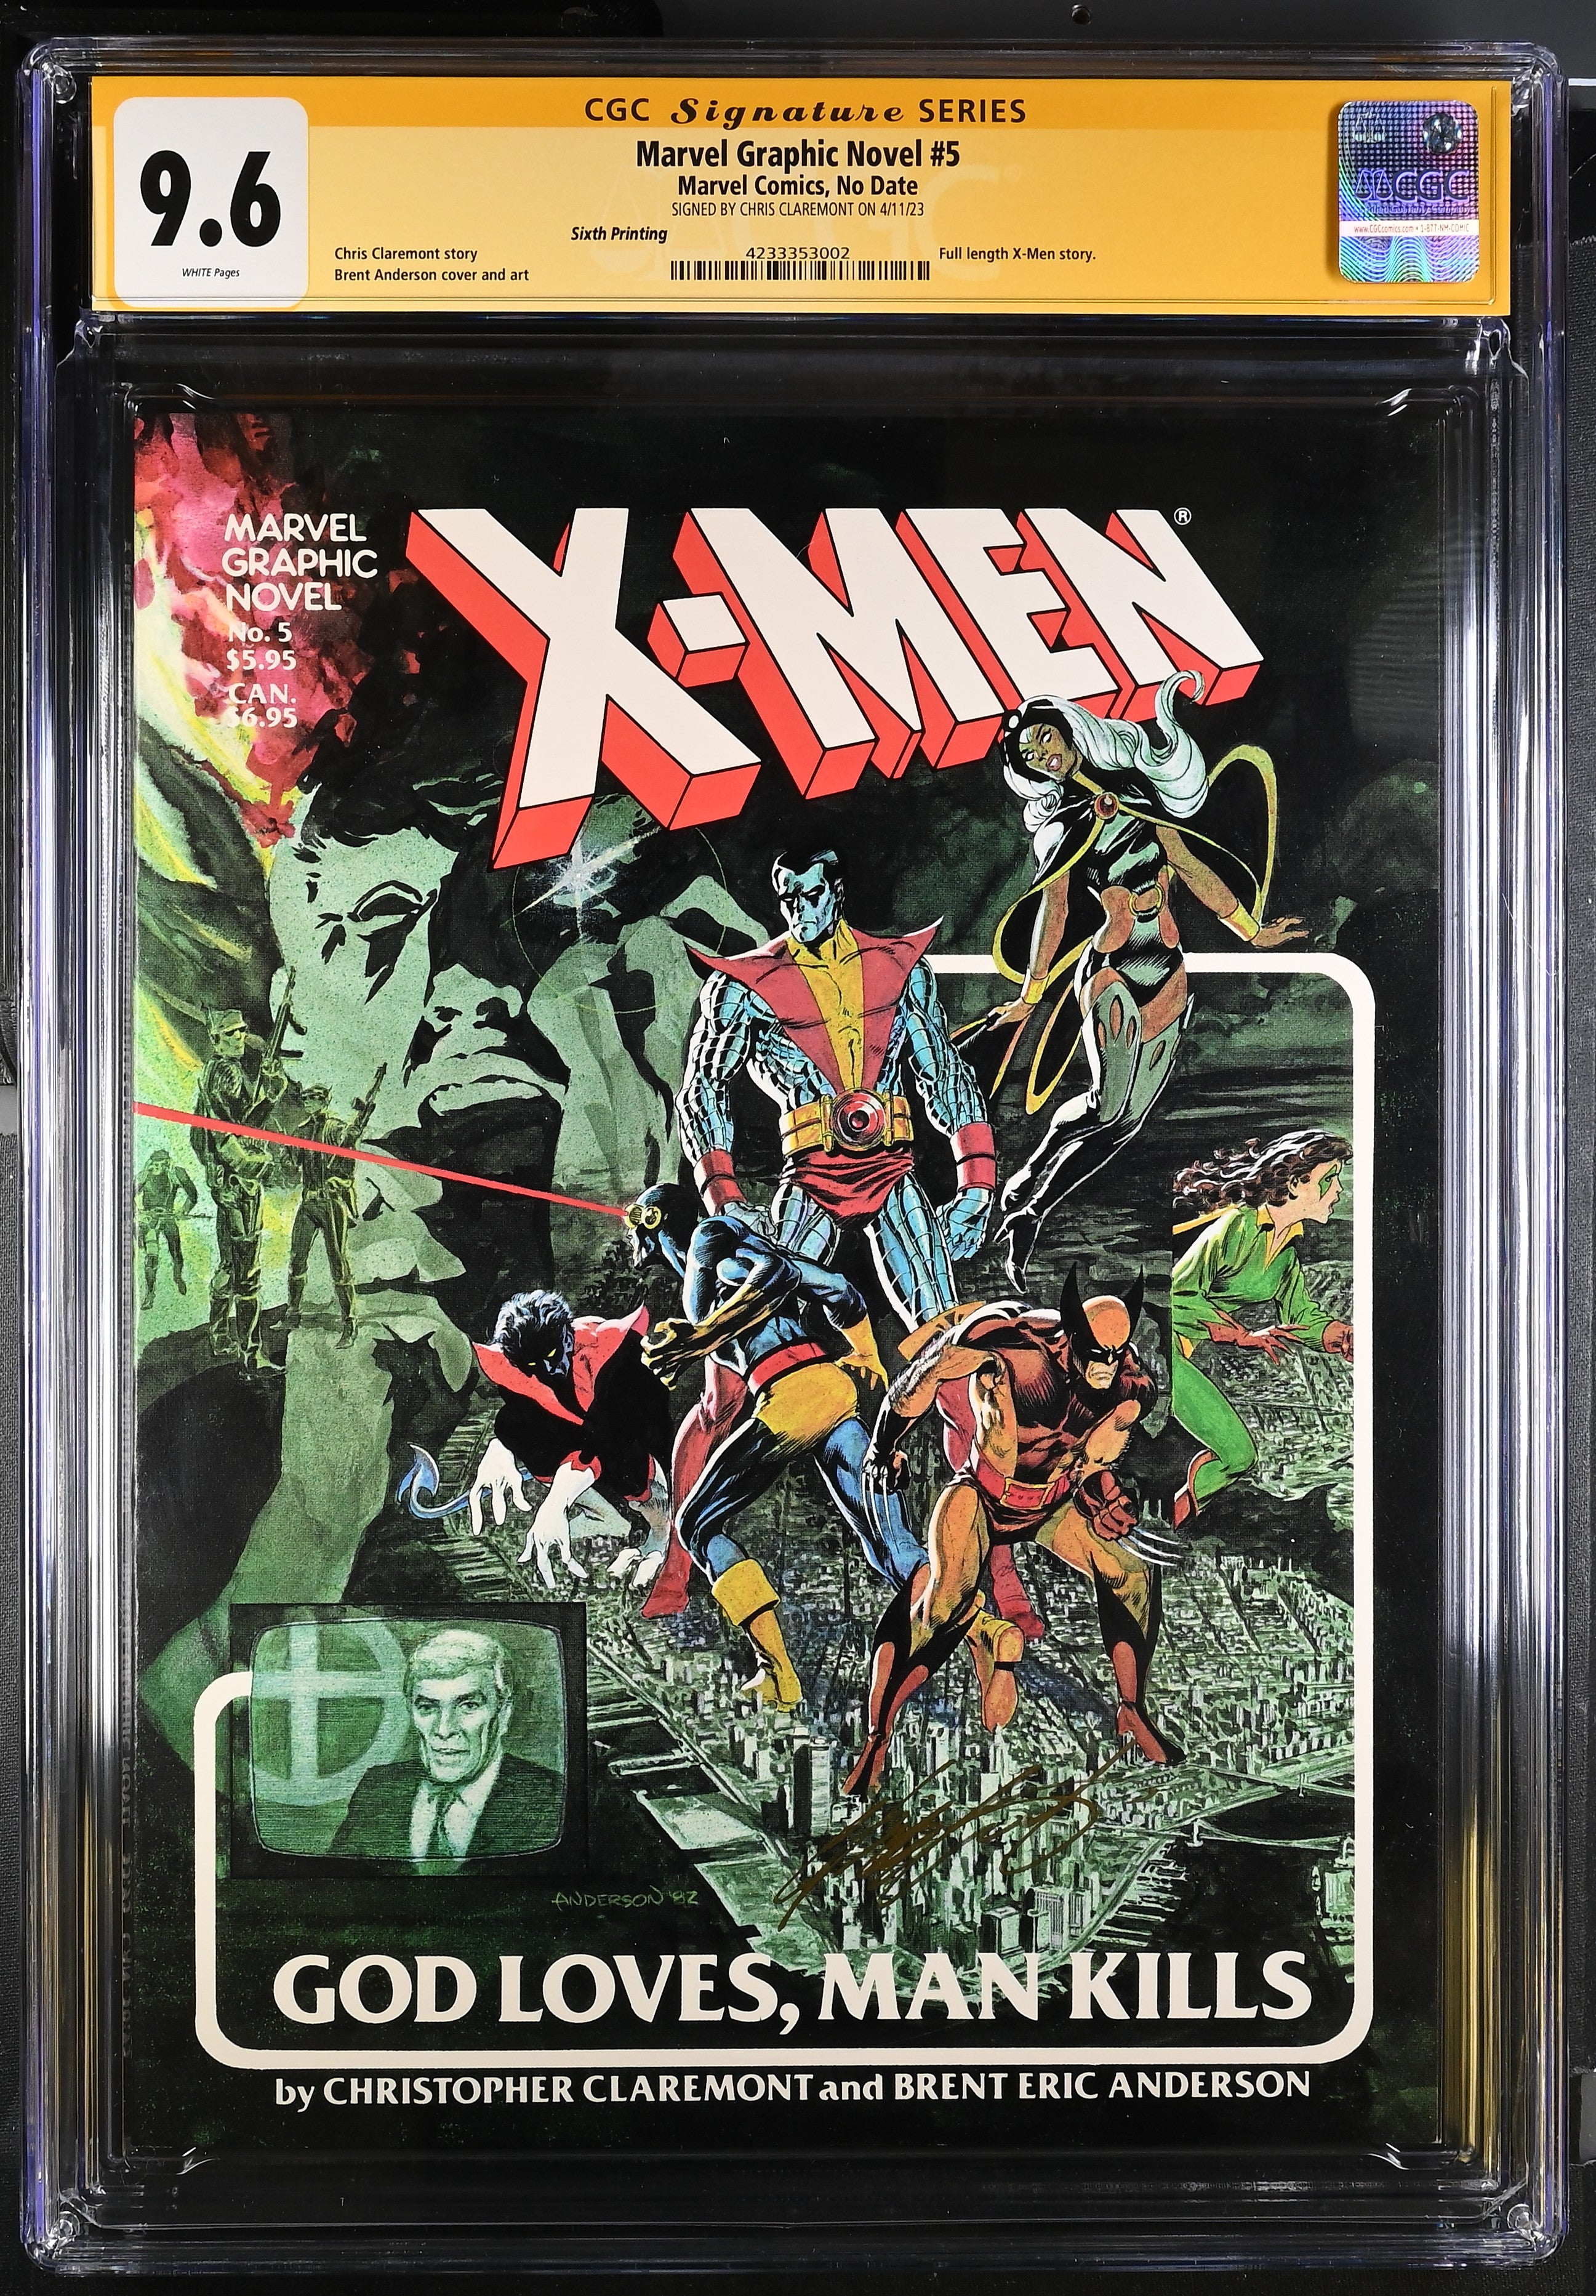 Marvel Graphic Novel #5 X-Men CGC 9.6 Signed by Chris Claremont 6th Printing